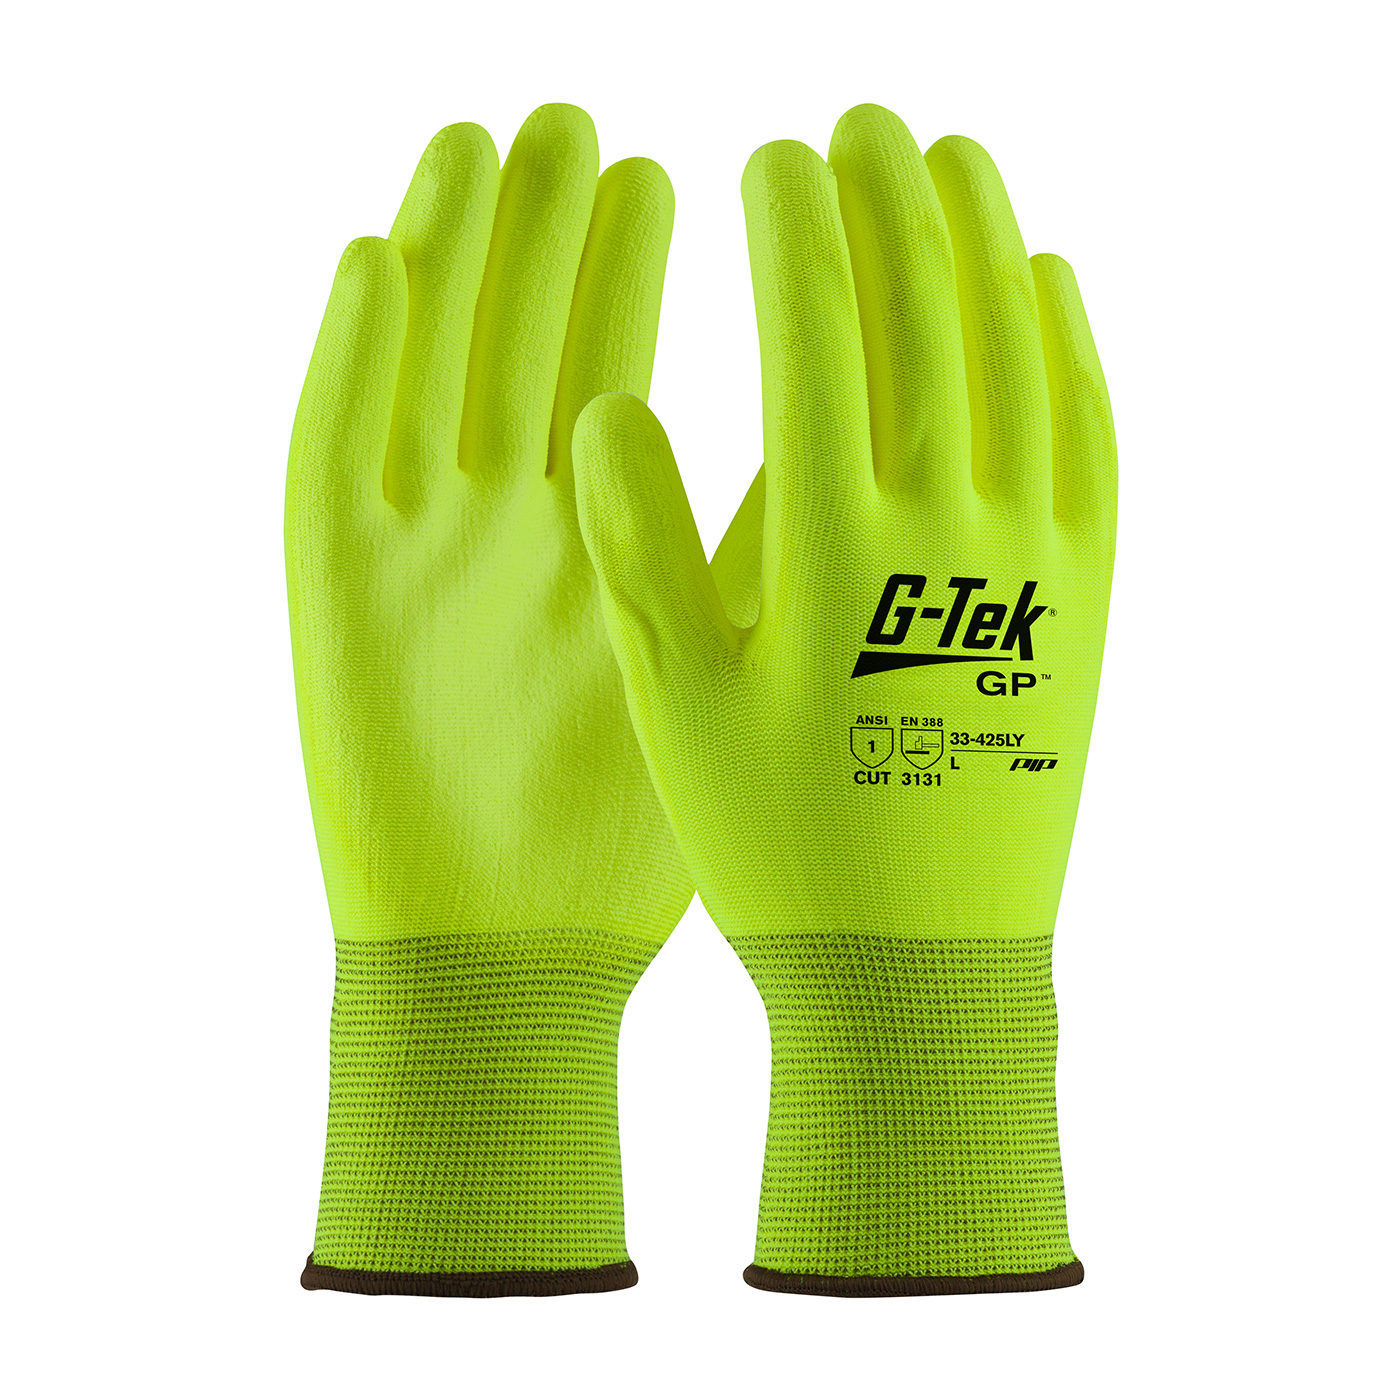 PIP 33-425LY/XL G-Tek GP Hi-Vis Seamless Knit Polyester Glove with Polyurethane Coated Smooth Grip on Palm & Fingers - X-Large PID-33 425LY XL